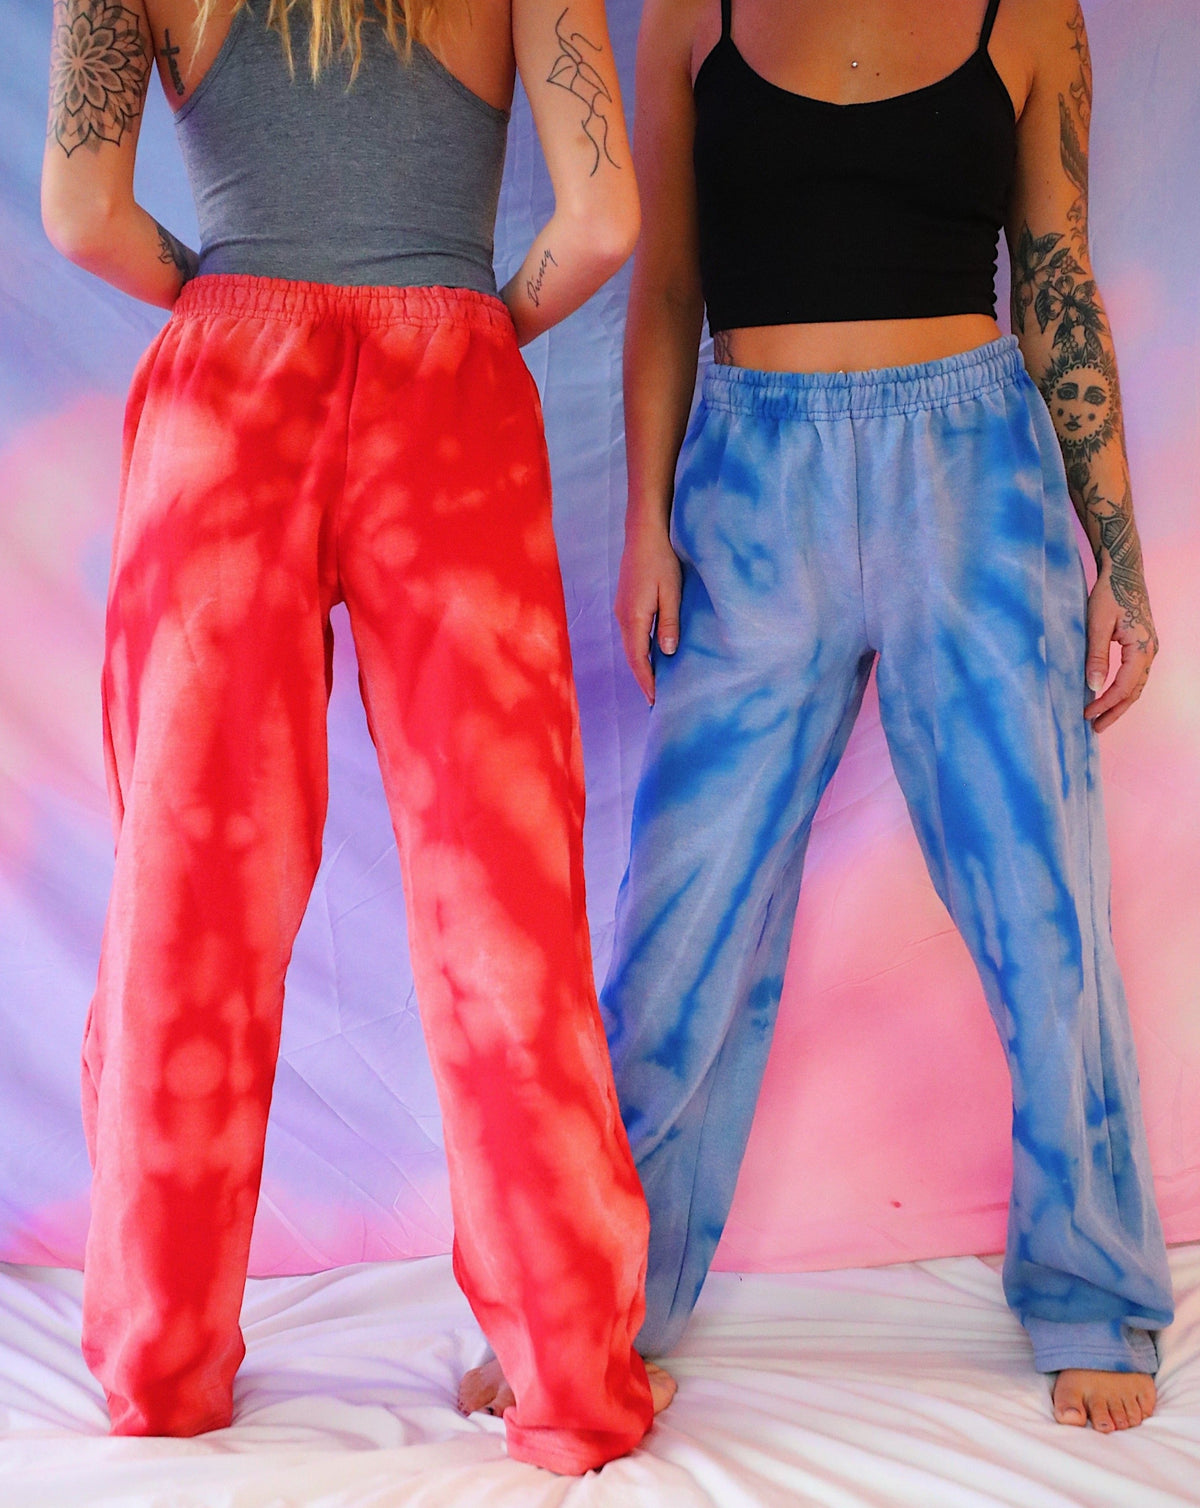 Red tie-dyed sweatpants and blue tie-dyed sweatpants